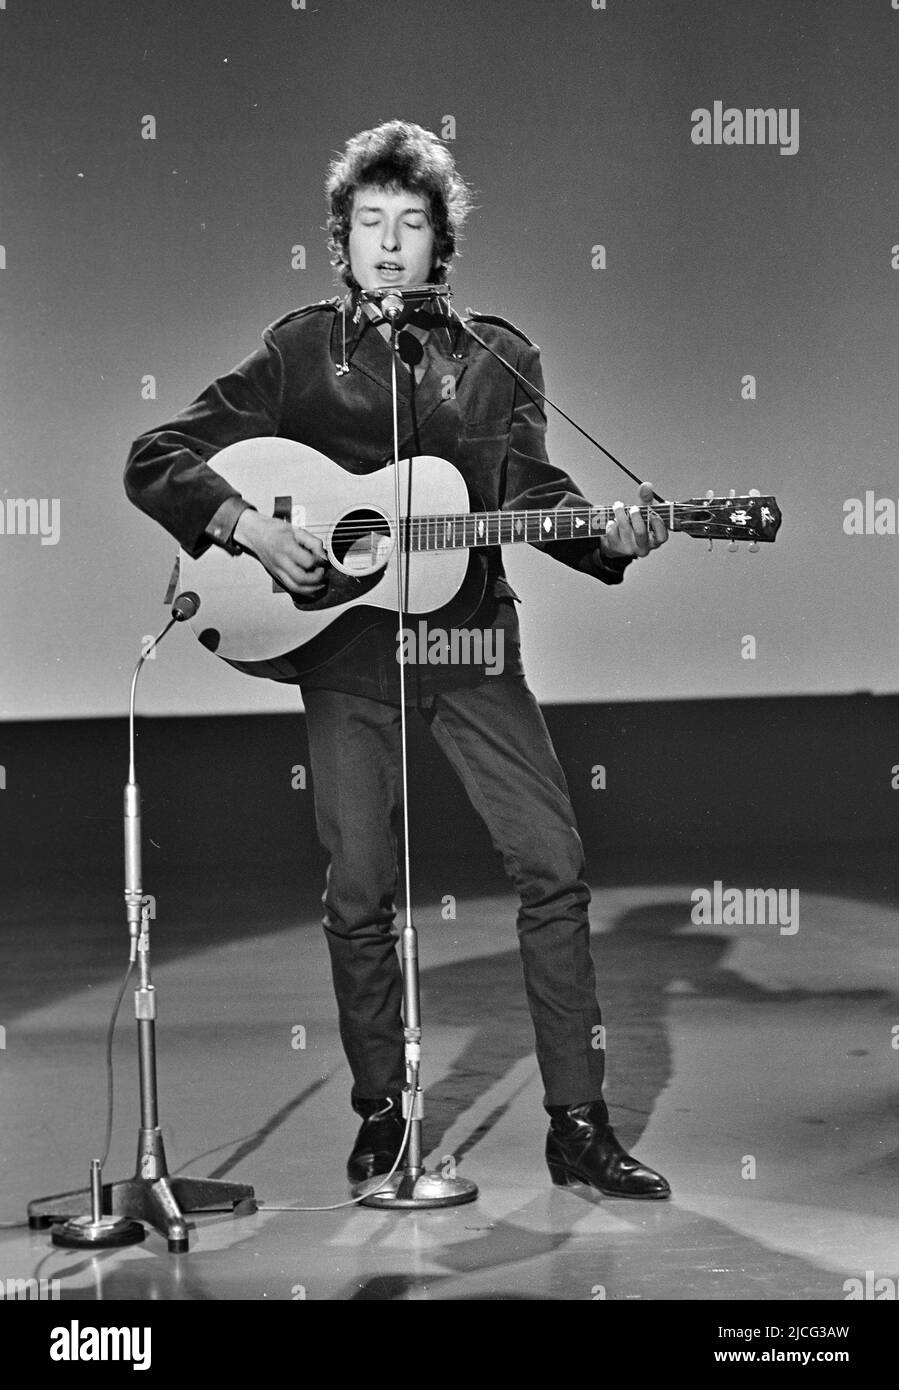 BOB DYLAN  American folk singer performing Times They Are A Changing at the BBC Shepherds Bush Studios 4 June 1965. Photo: Tony Gale Stock Photo